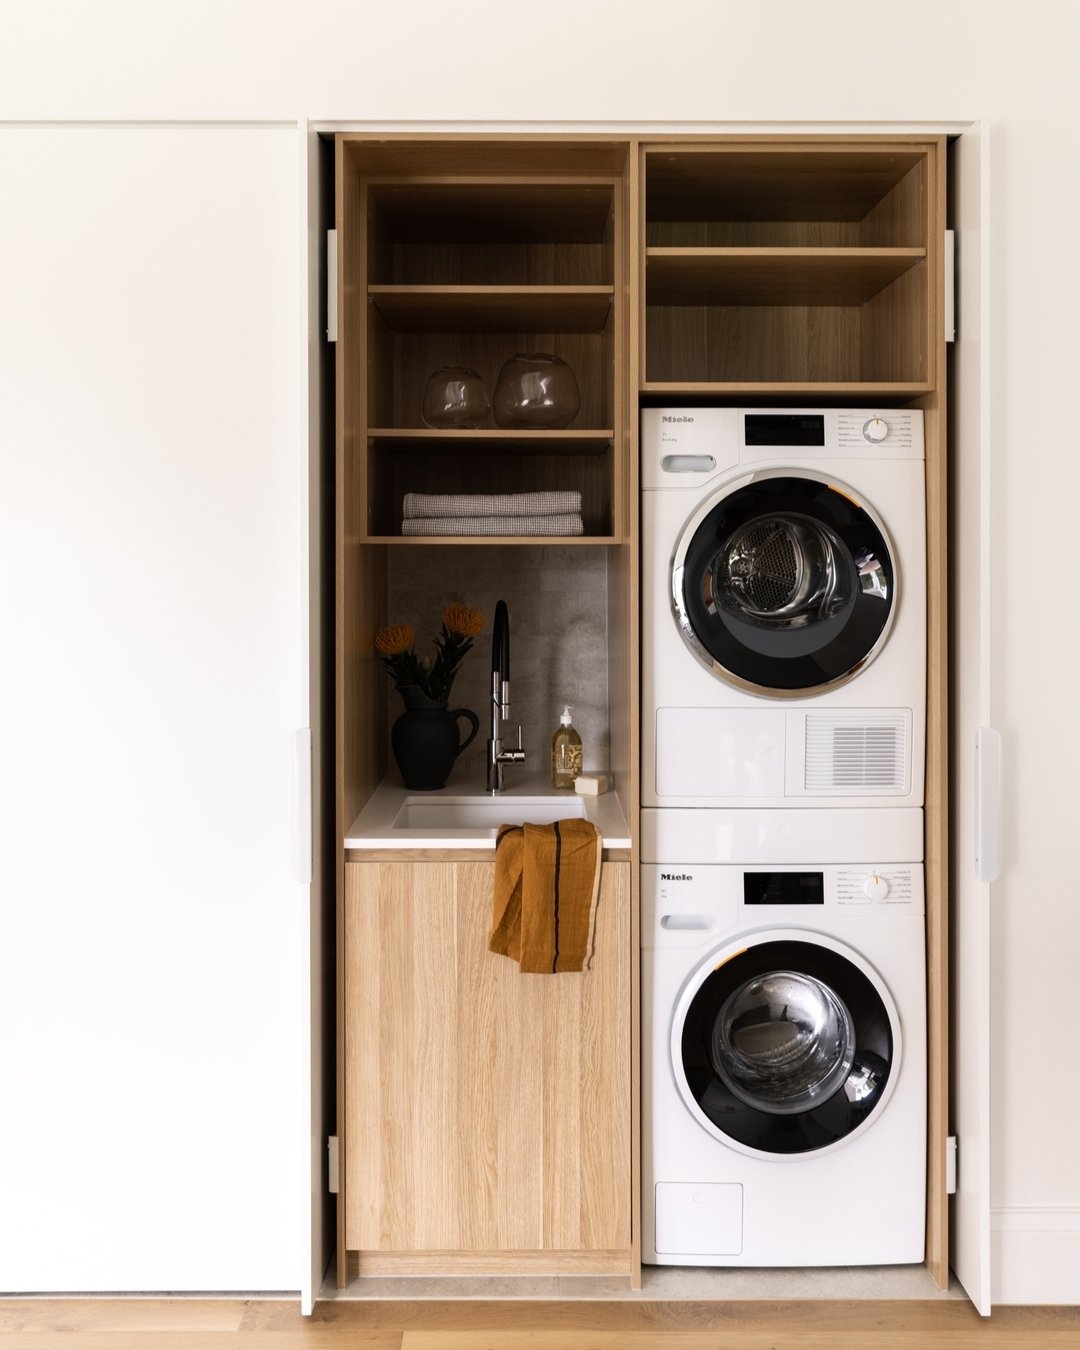 Now you see it .....now you don't. 

Sometimes we don't have the space, nor the need for a large family style laundry. But compact doesn't have to be dull - in fact compact spaces provide a great opportunity to use beautiful finishes.

This European 